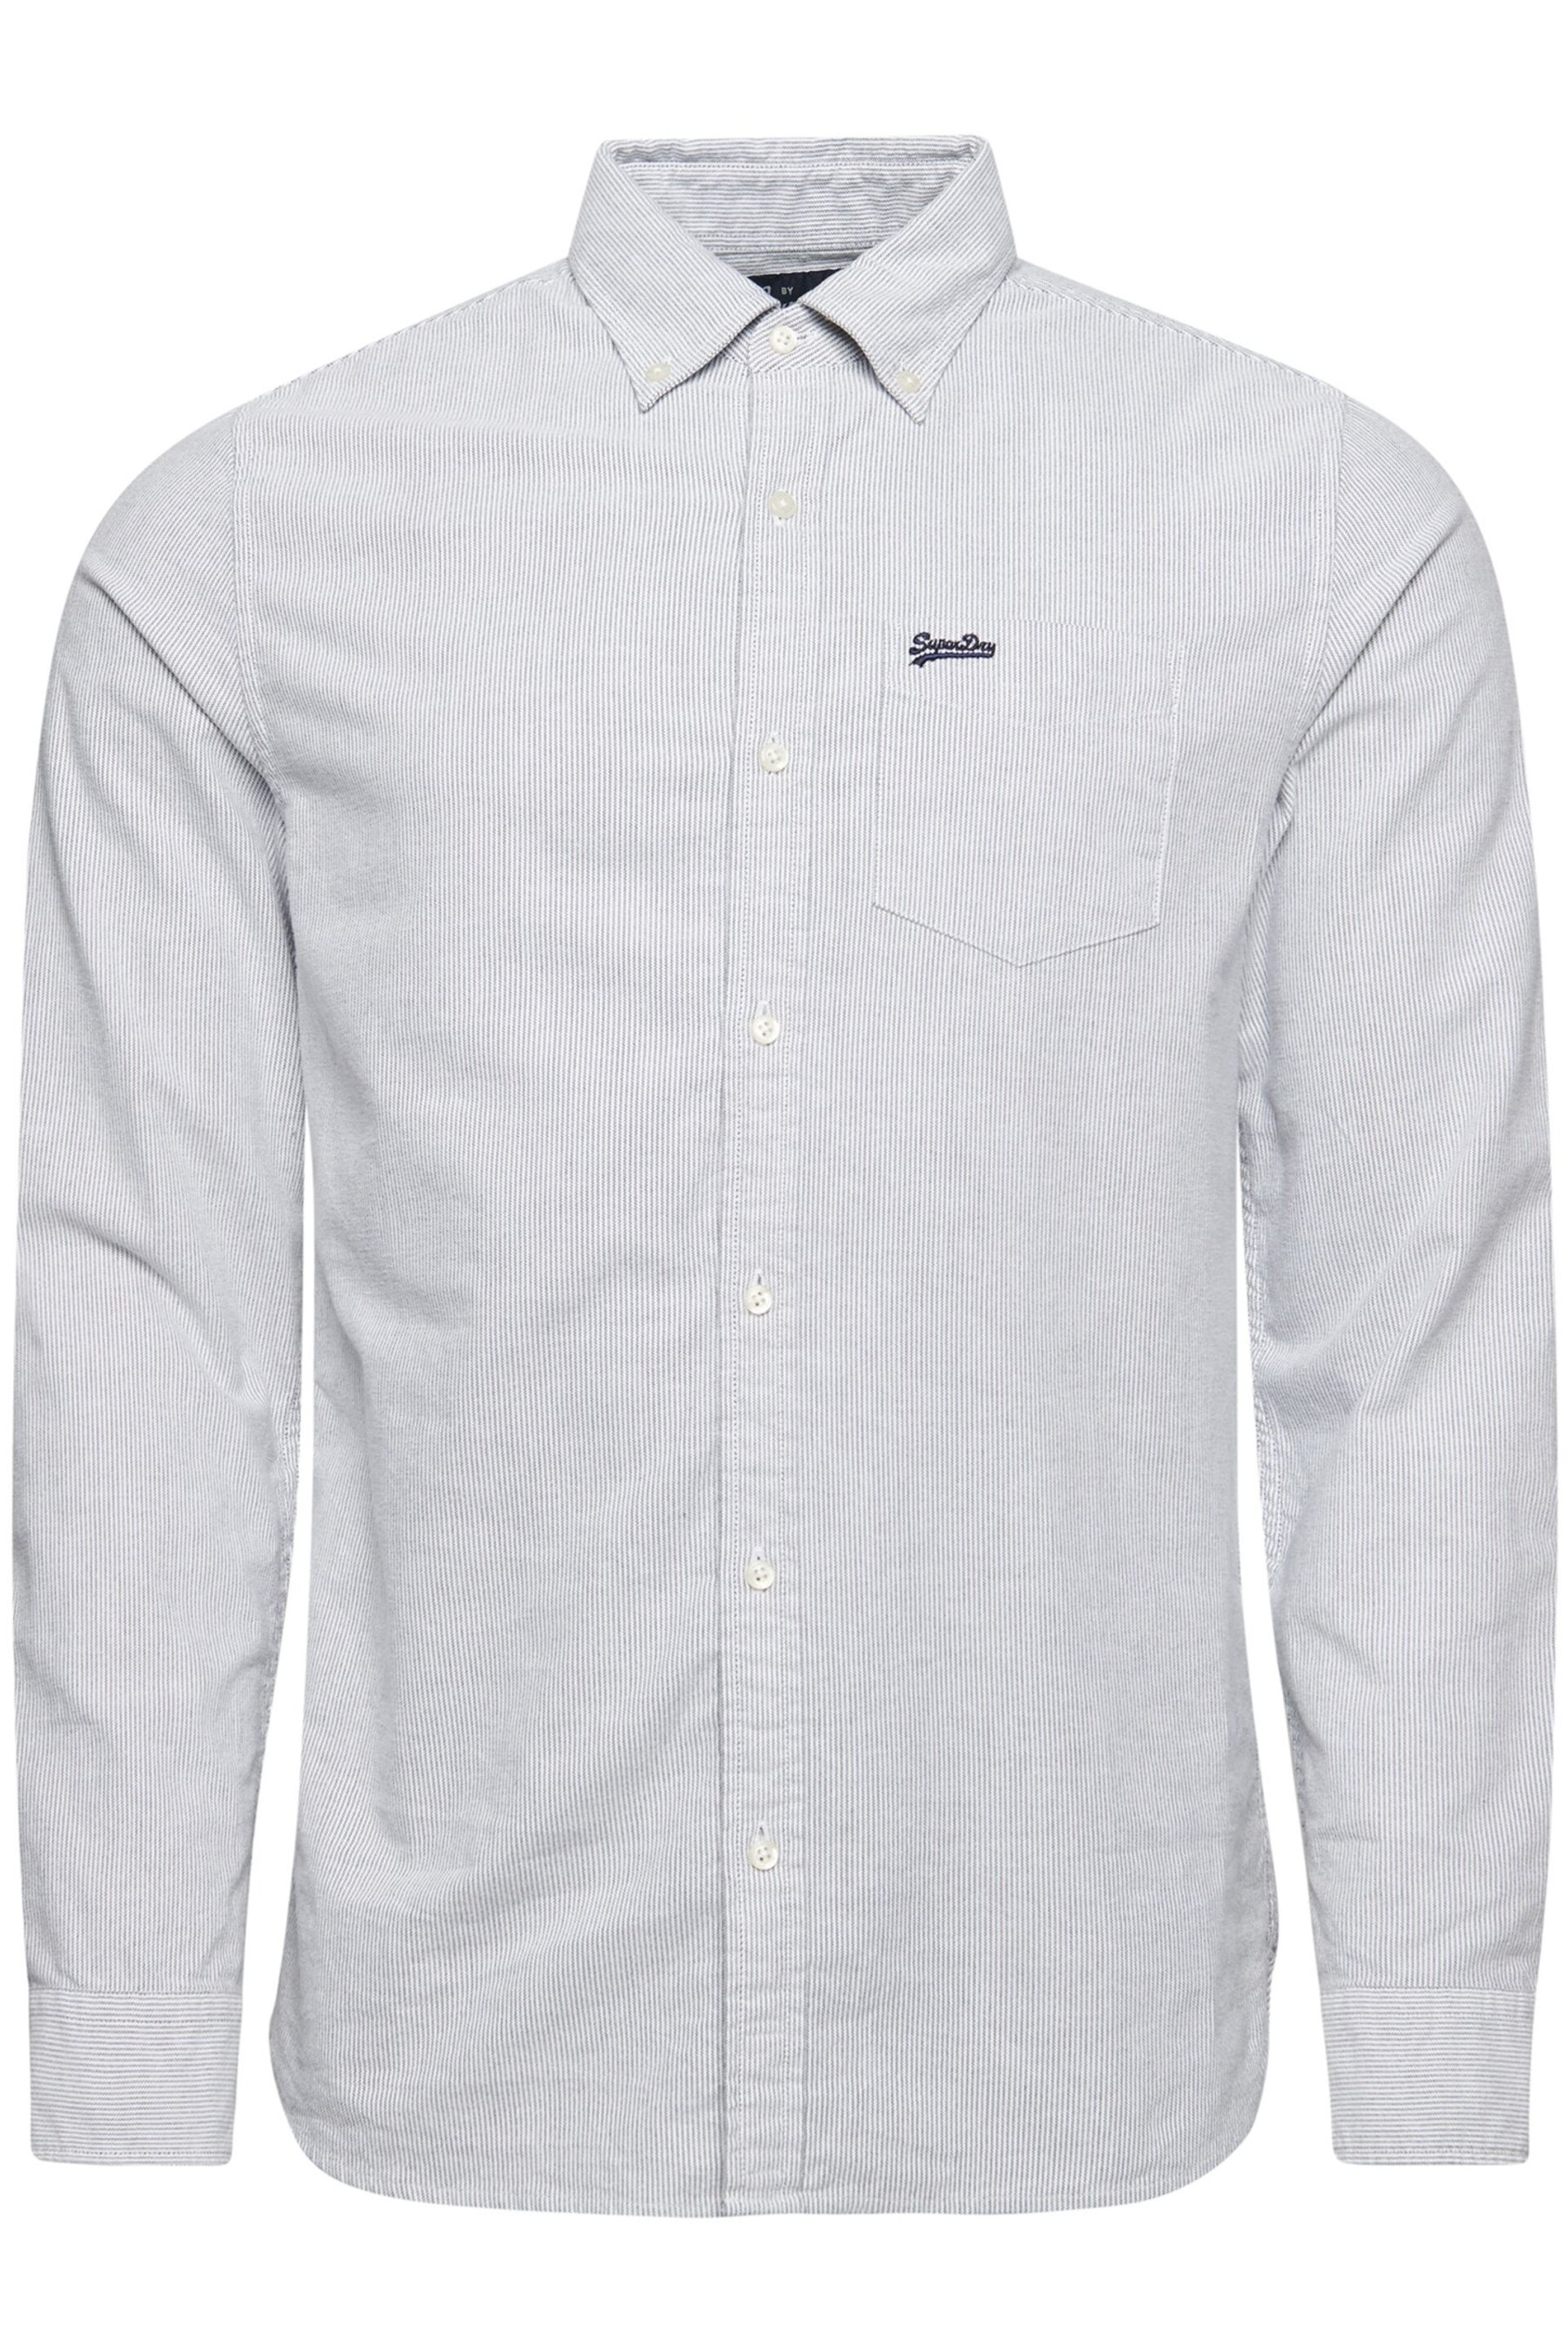 Superdry Blue Cotton Long Sleeved Oxford Shirt - Image 8 of 8